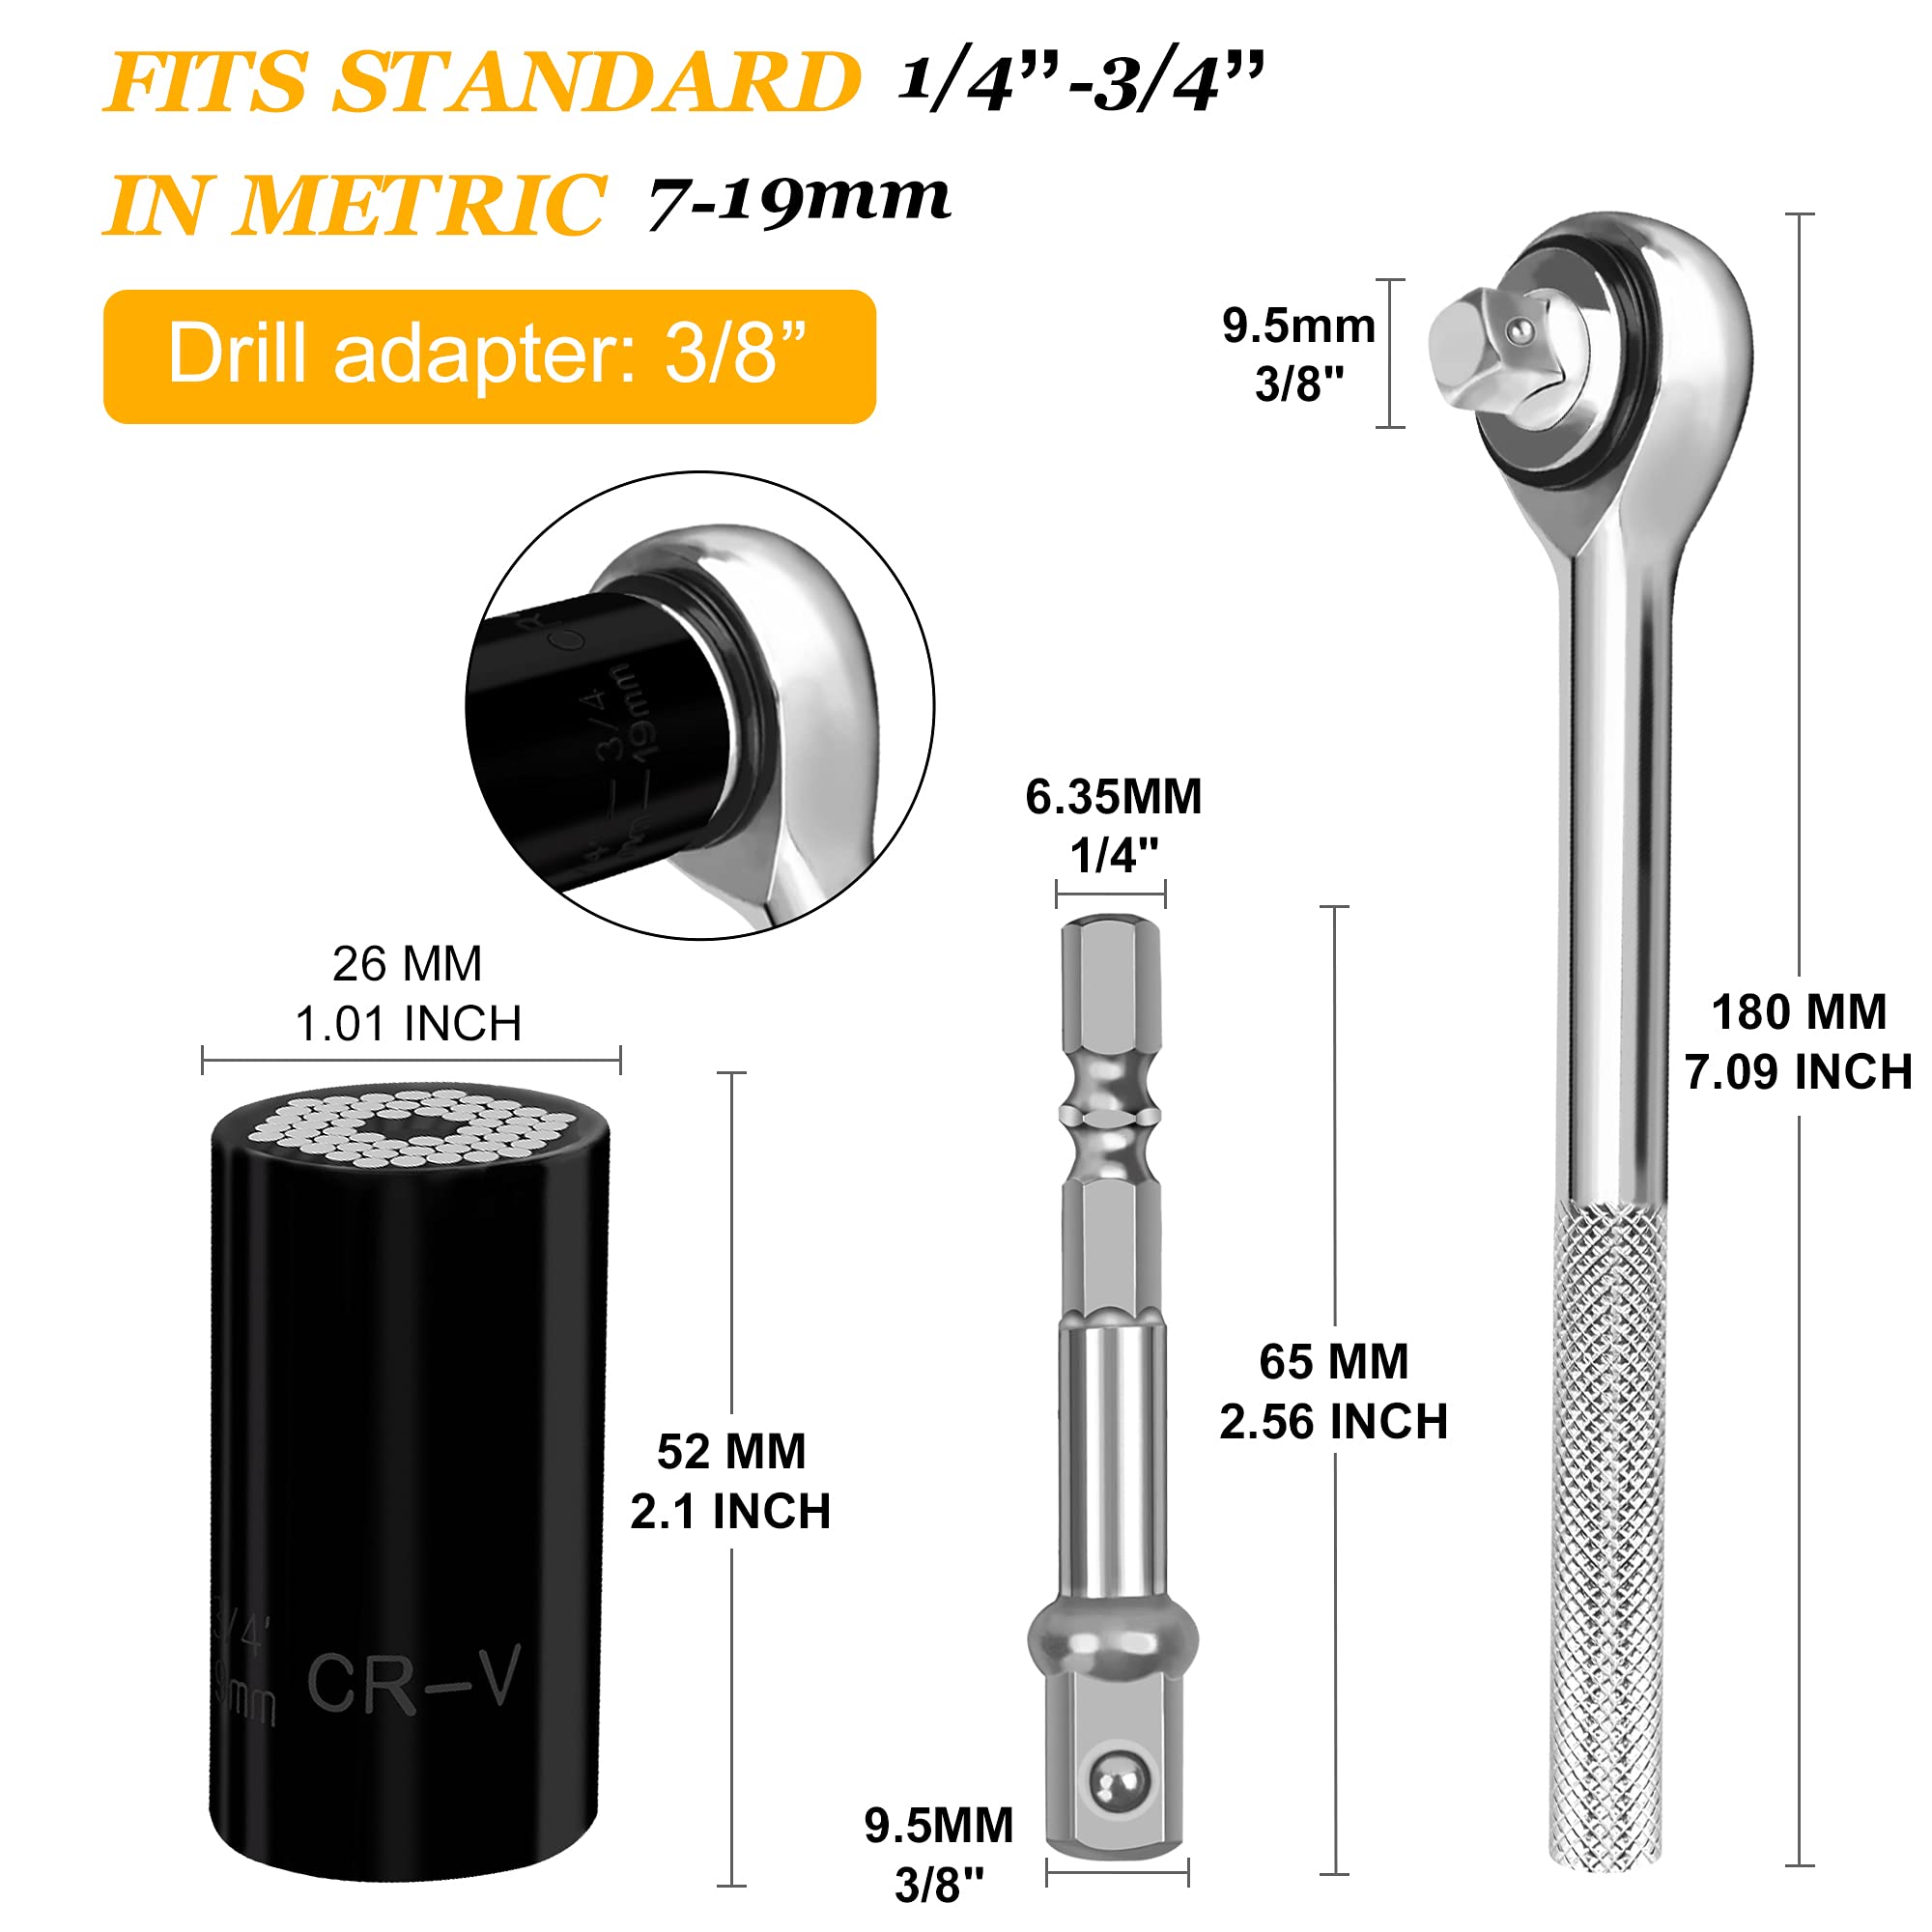 Gifts for Men Him Boyfriend Husband, Universal Socket Wrench Grip Socket Tool Sets Fits Standard 1/4'' - 3/4'' Metric 7mm-19mm with Power Drill Adapter(black)